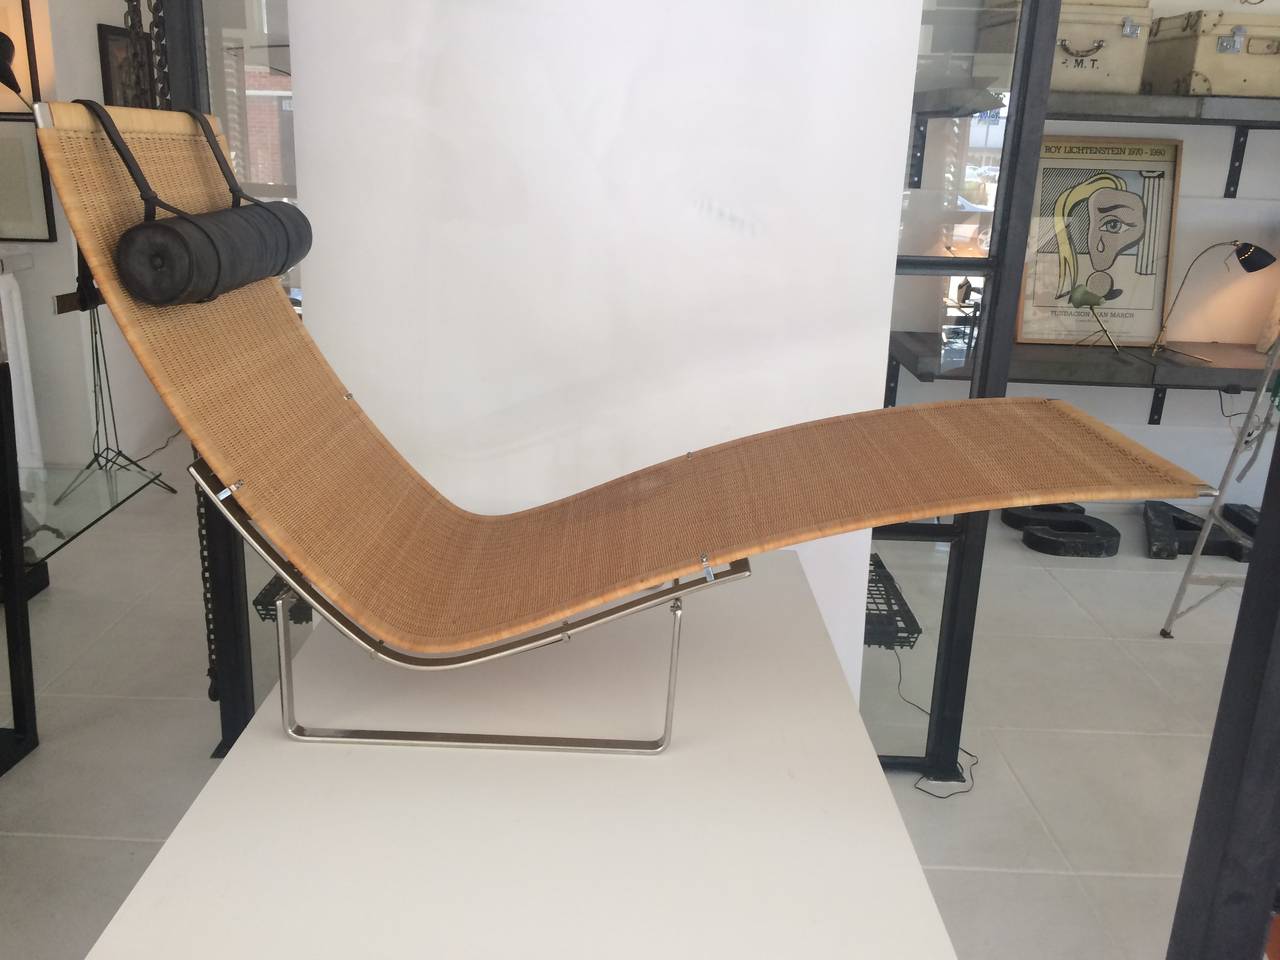 Designed by Poul Kjærholm (Danish 1929-1980). 
A stainless steel, cane, and leather lounge chair.
Model PK 24, for E. Kold Christensen, Copenhagen, Denmark, designed 1965.  The organically shaped lounge in woven cane on a stainless steel frame